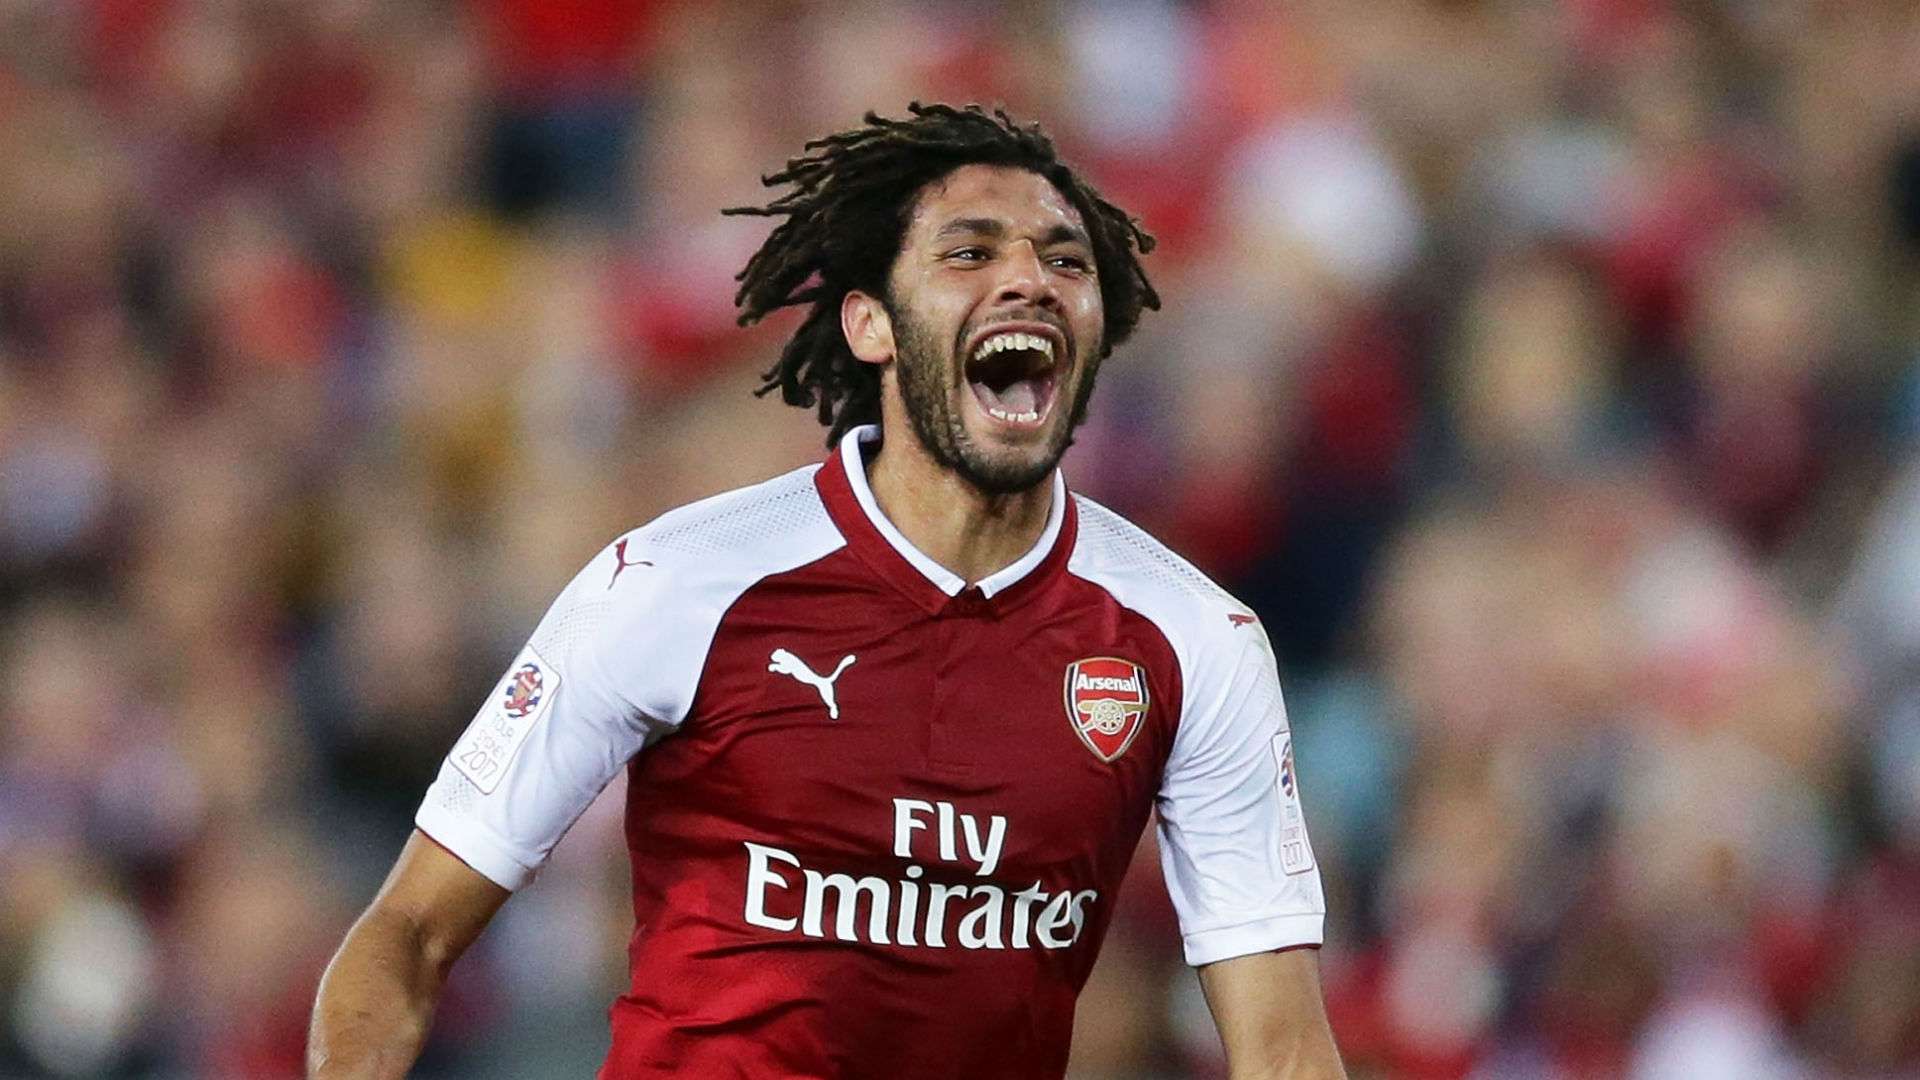 Mohamed El-Neny during a game with the Gunners 